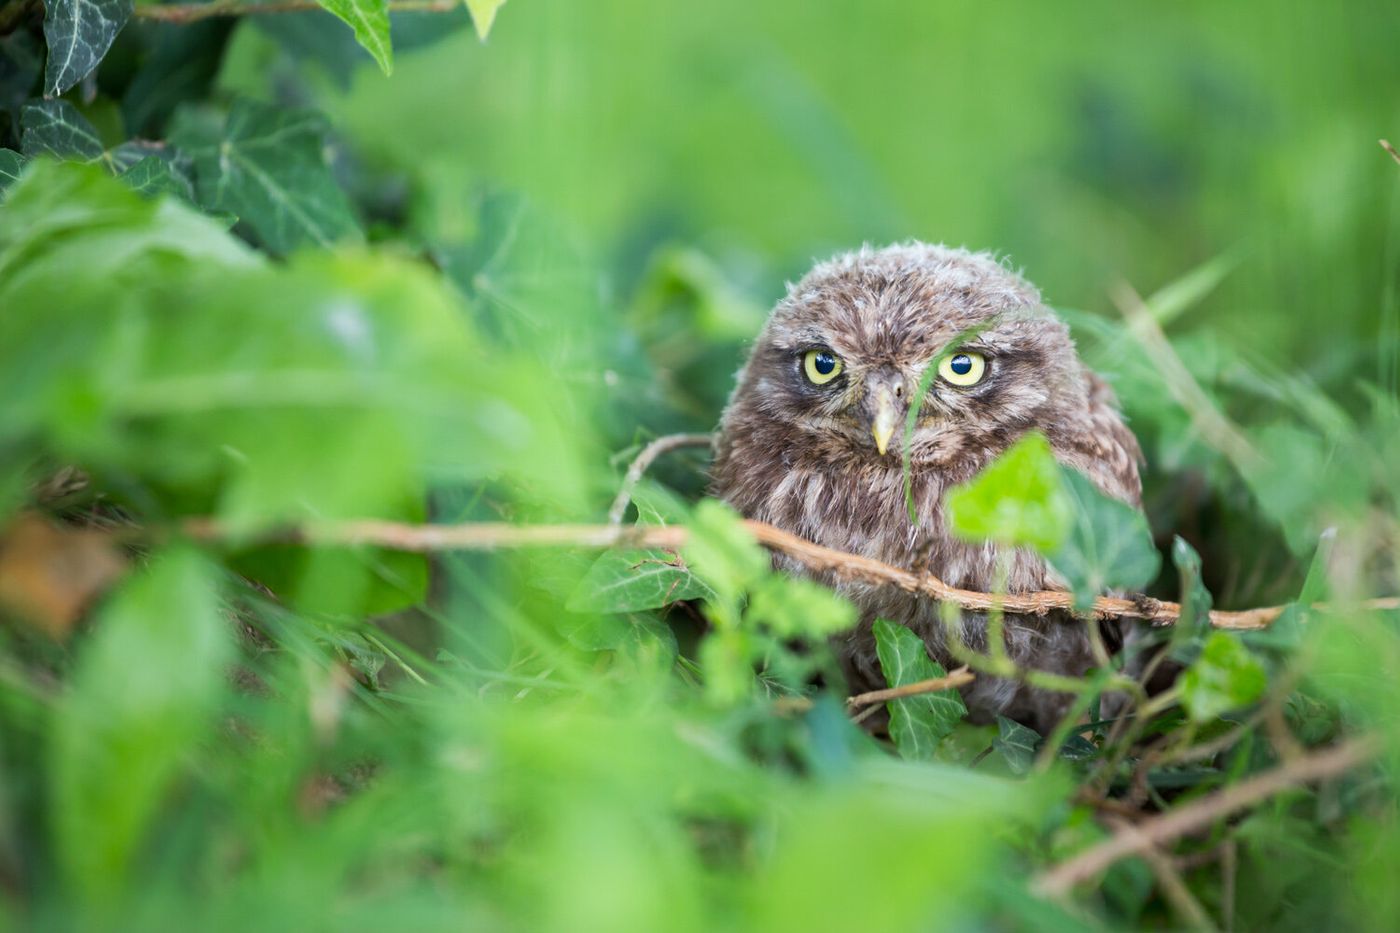 A 'little owl' in its natural habitat.